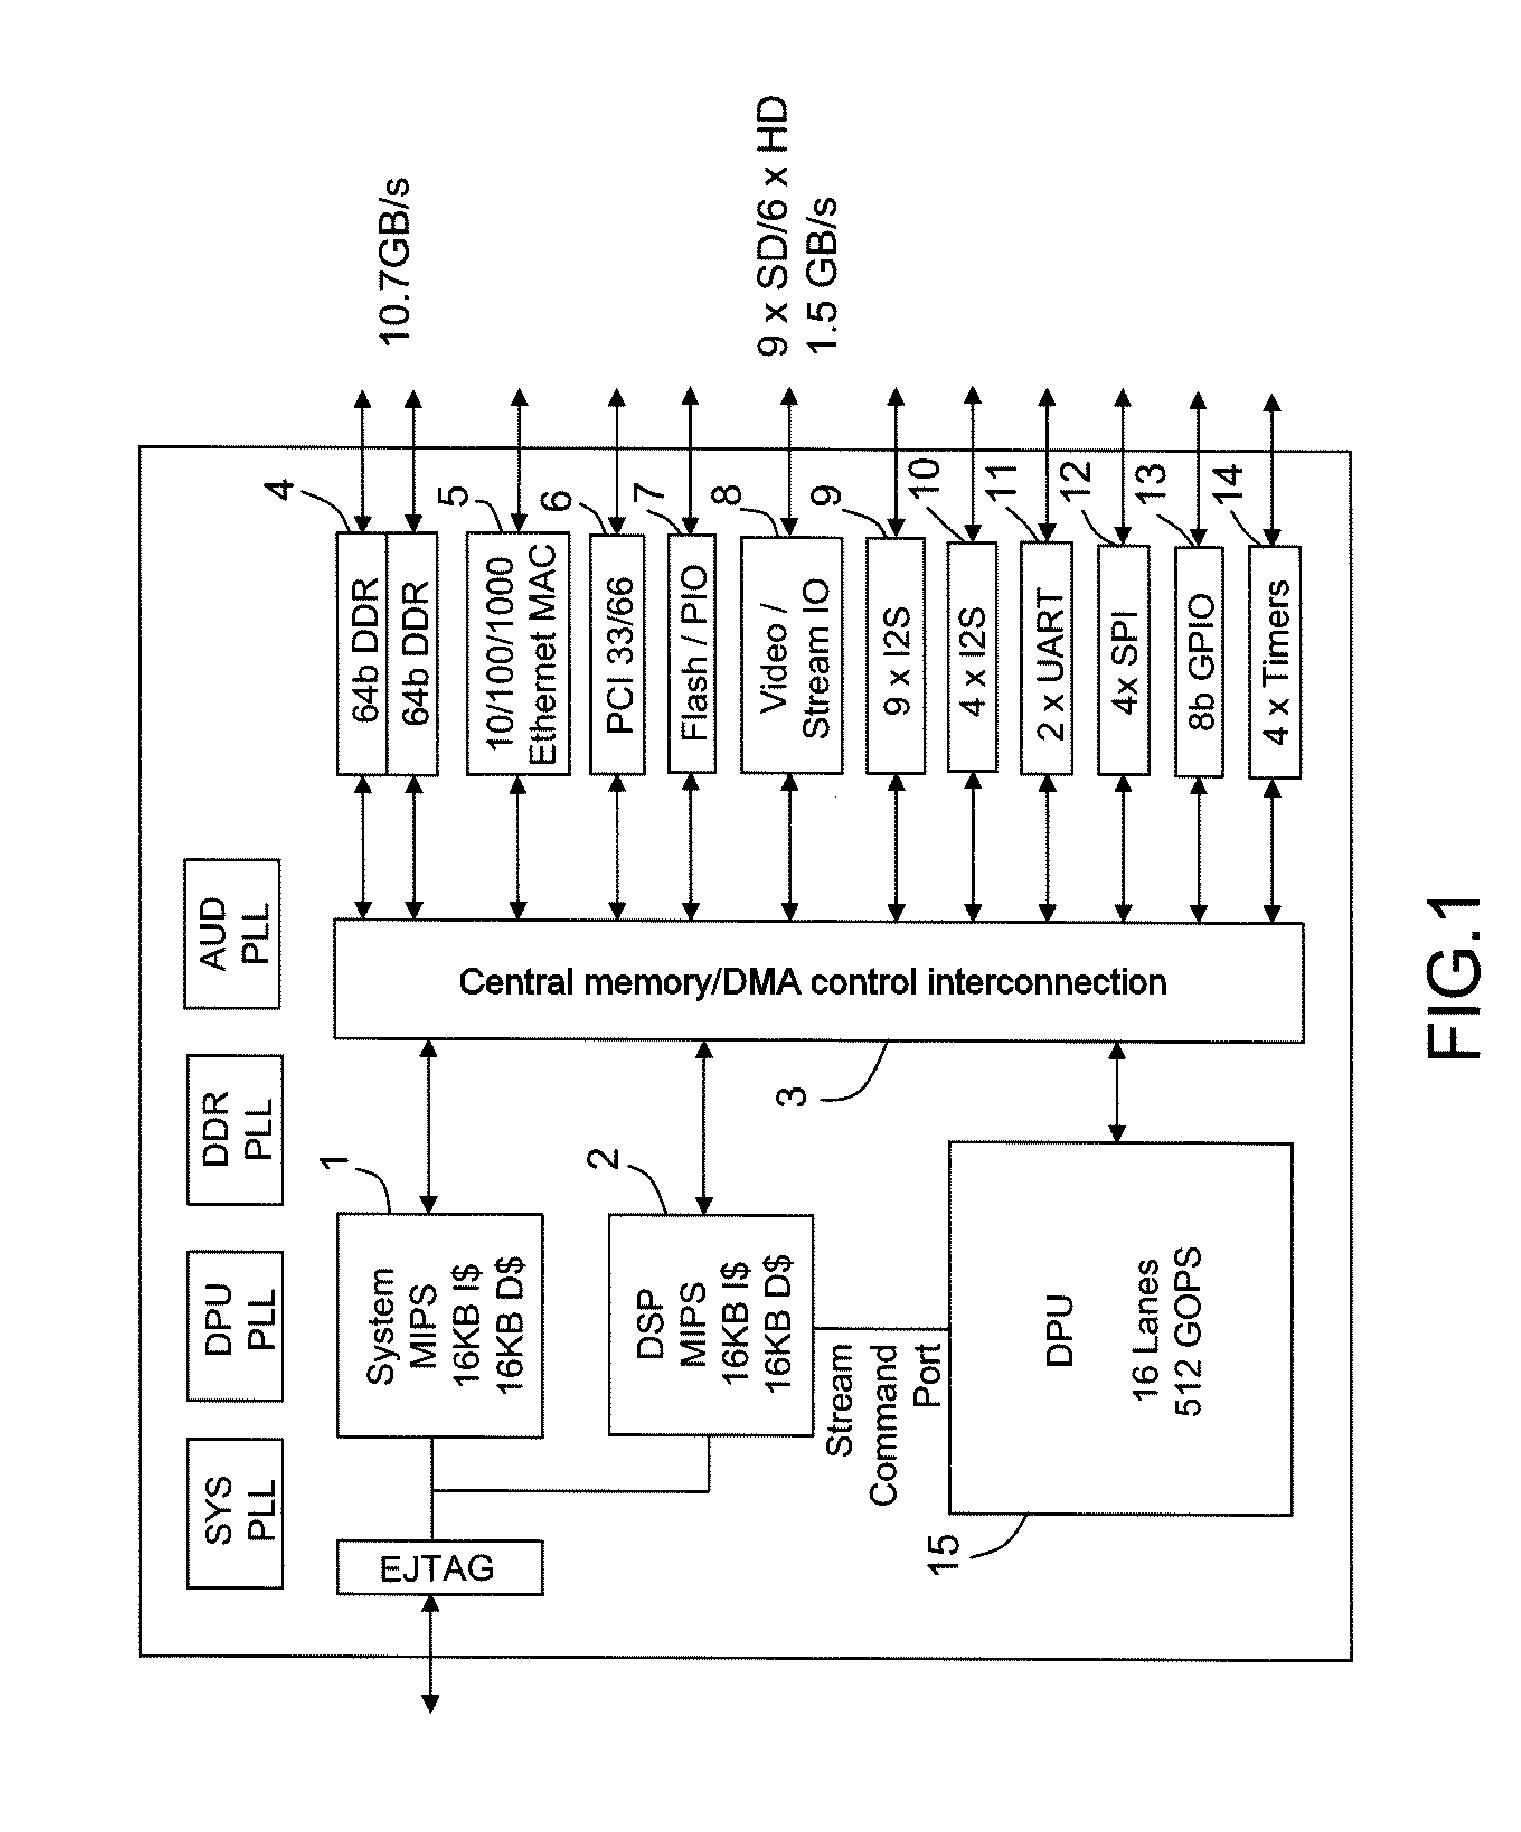 Circuit comprising a microprogrammed machine for processing the inputs or the outputs of a processor so as to enable them to enter or leave the circuit according to any communication protocol